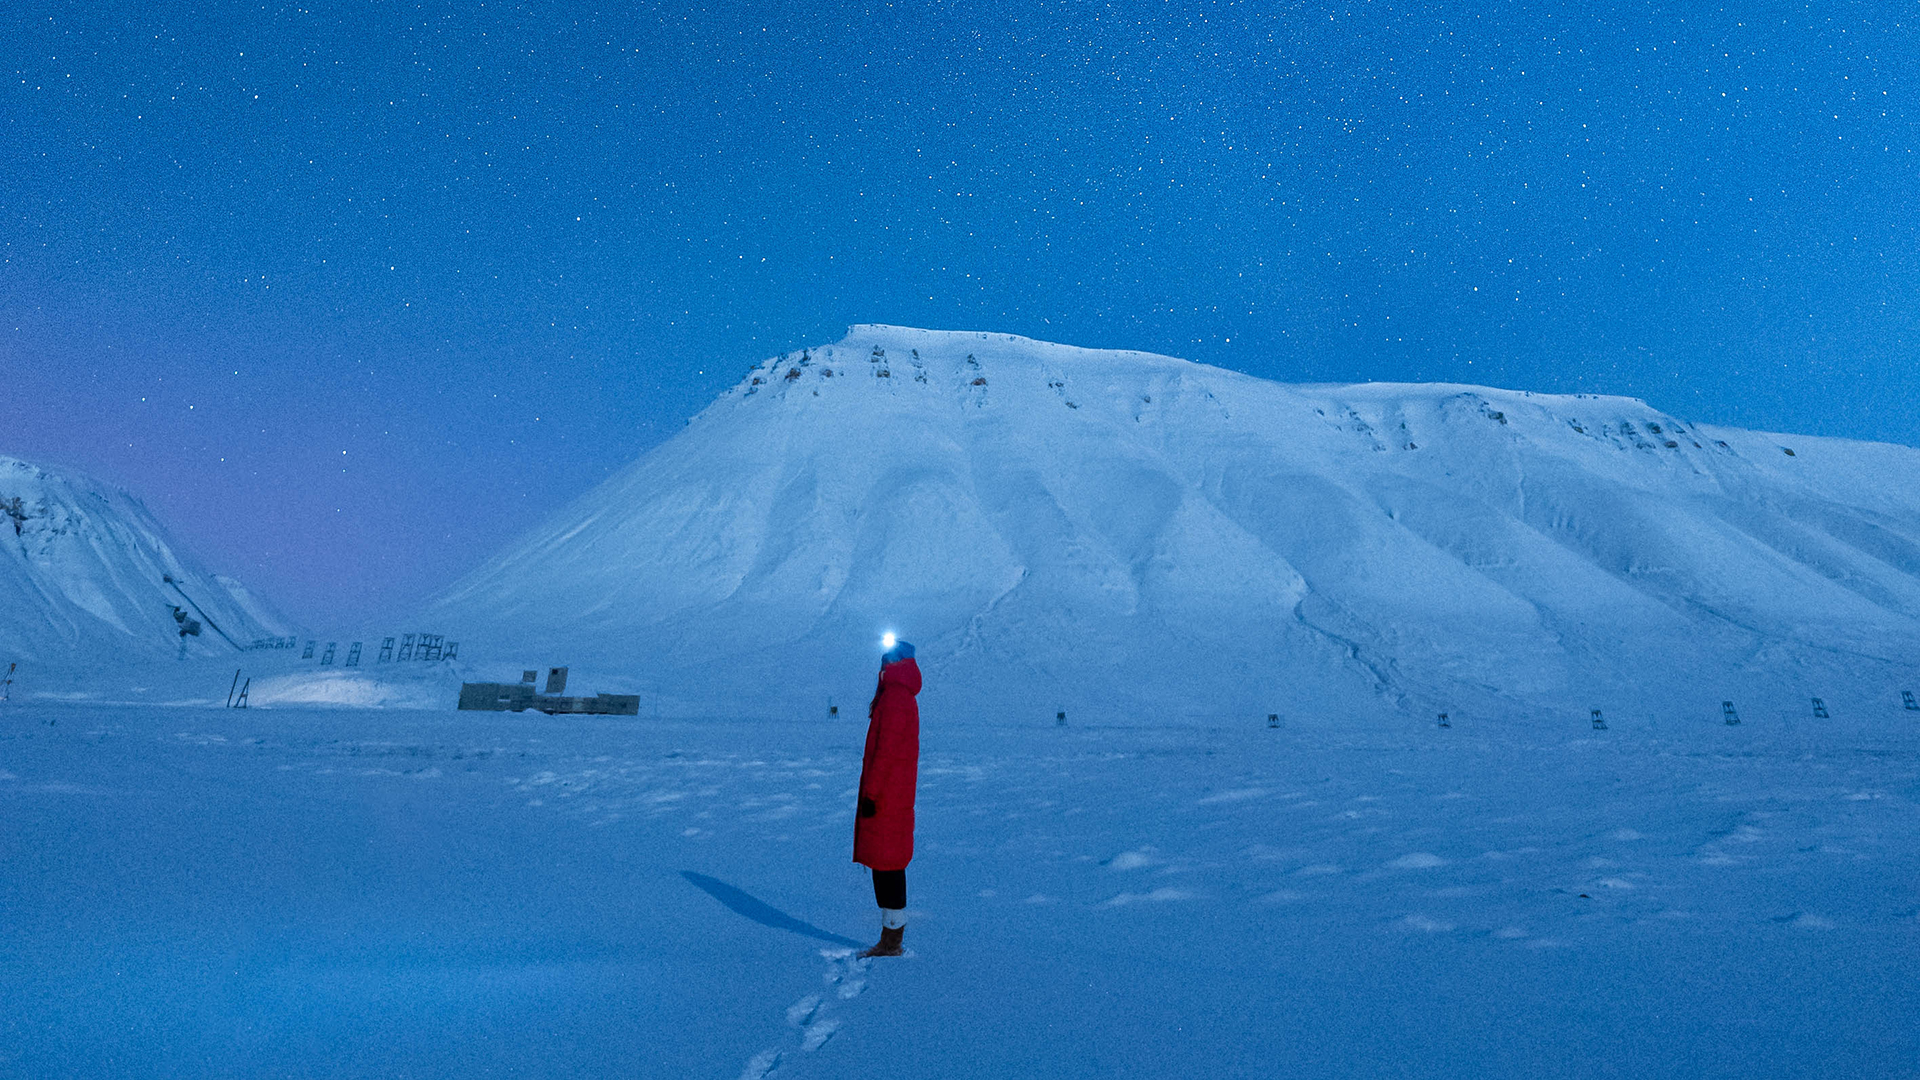 A woman in a red coat stands in a dark blue snowy landscape.